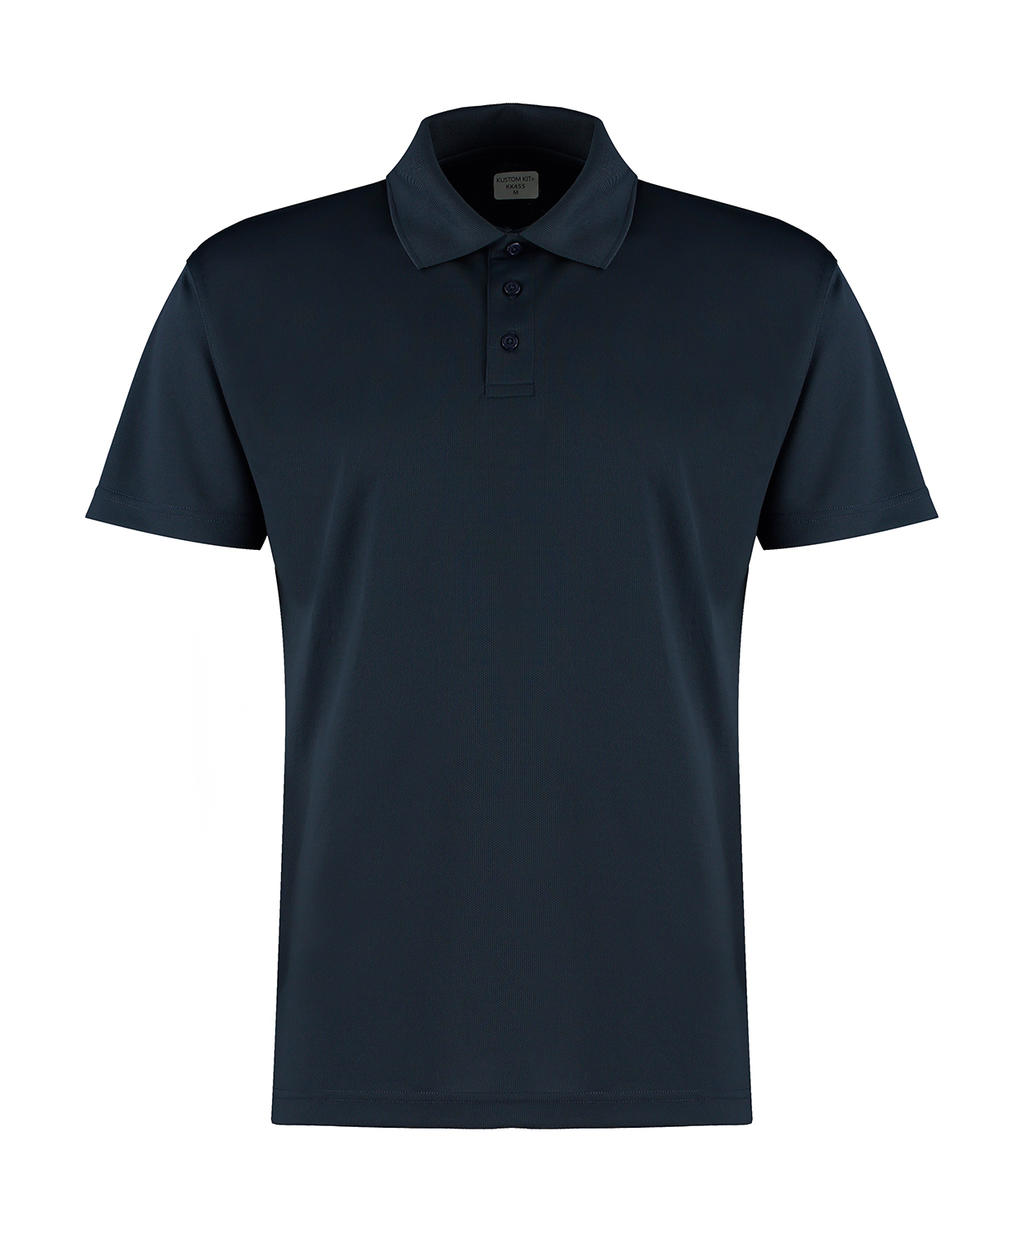 542.11 / Regular Fit Cooltex® Plus Micro Mesh Polo / Navy